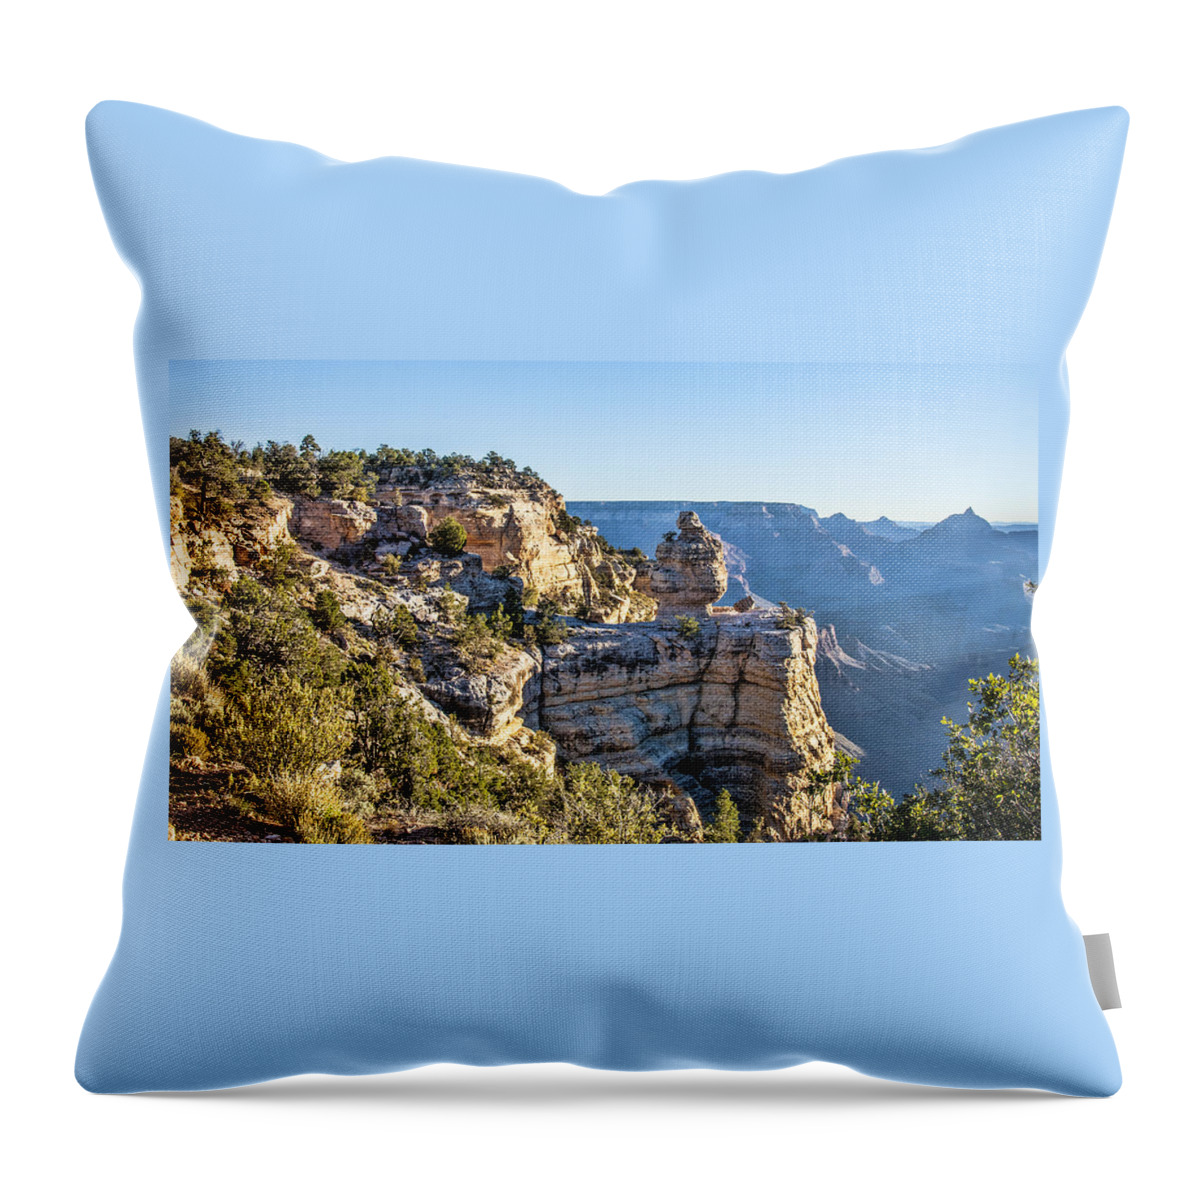 Grand Canyon Sunrise Throw Pillow featuring the photograph Grand Canyon Sunrise by Daniel Hebard